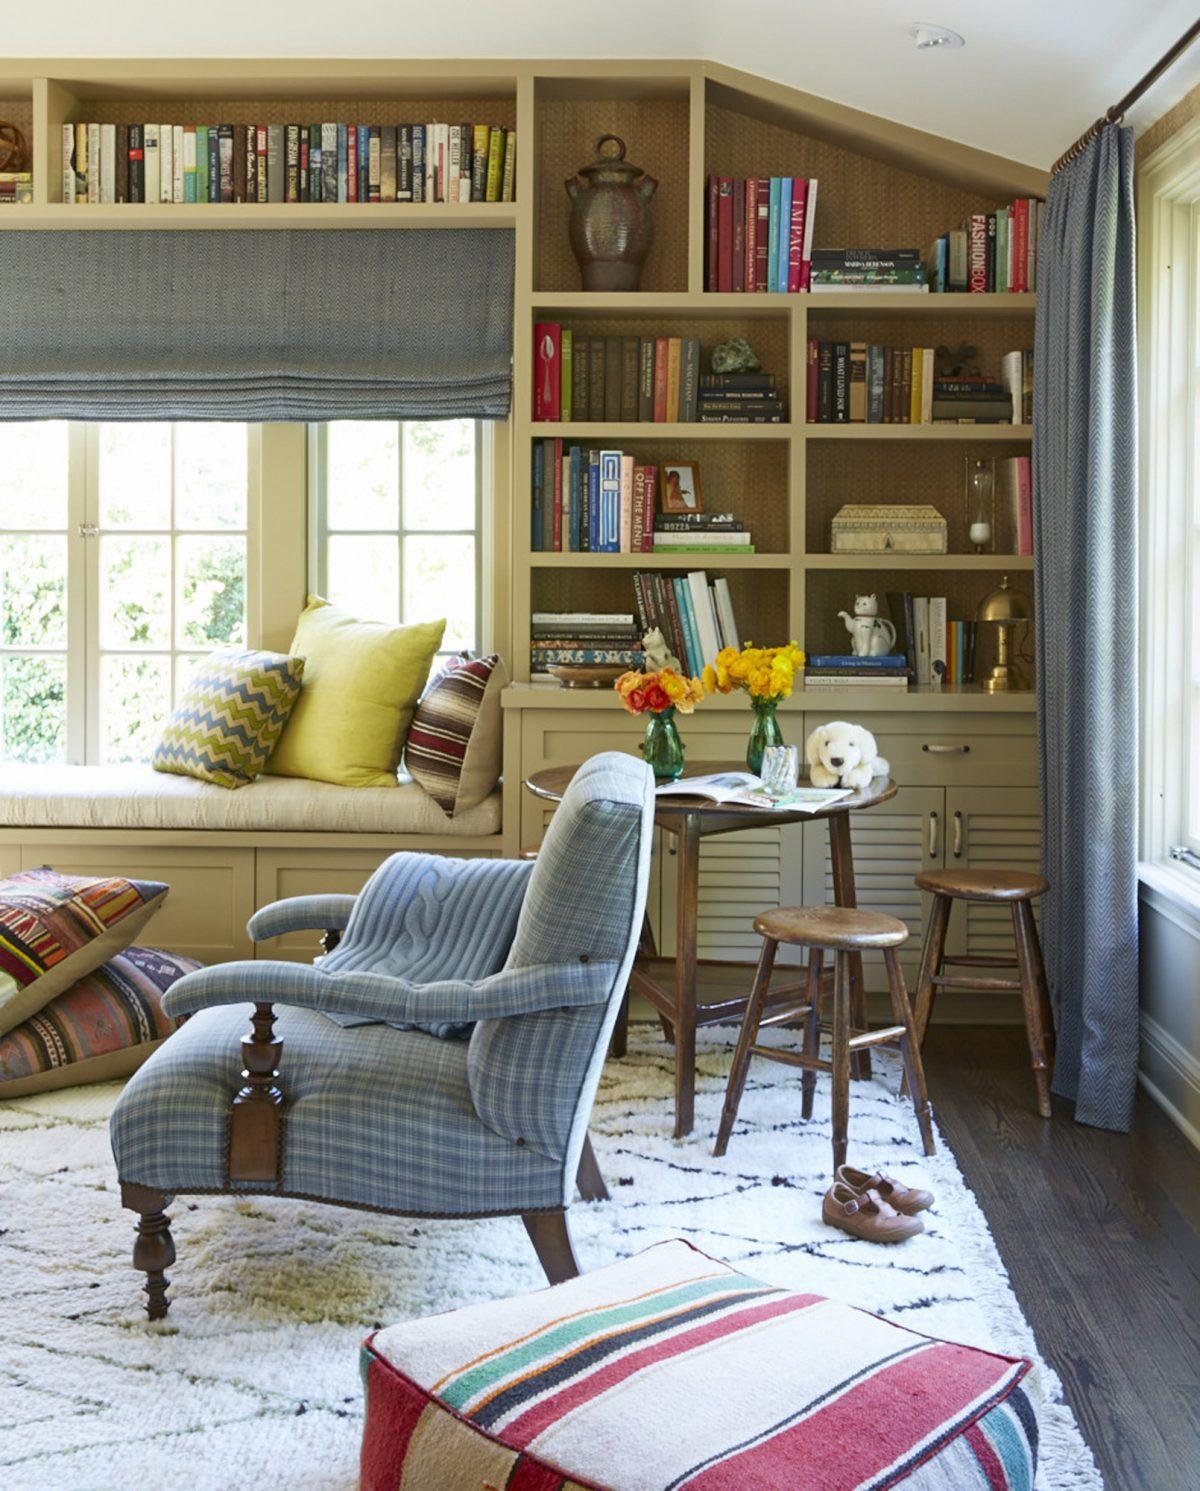 A child-friendly family room provides closed storage for stashing toys and a low-slung table with stools small enough for a child but stylish enough to please the grown-ups. (Victoria Pearson/Nathan Turner via AP)